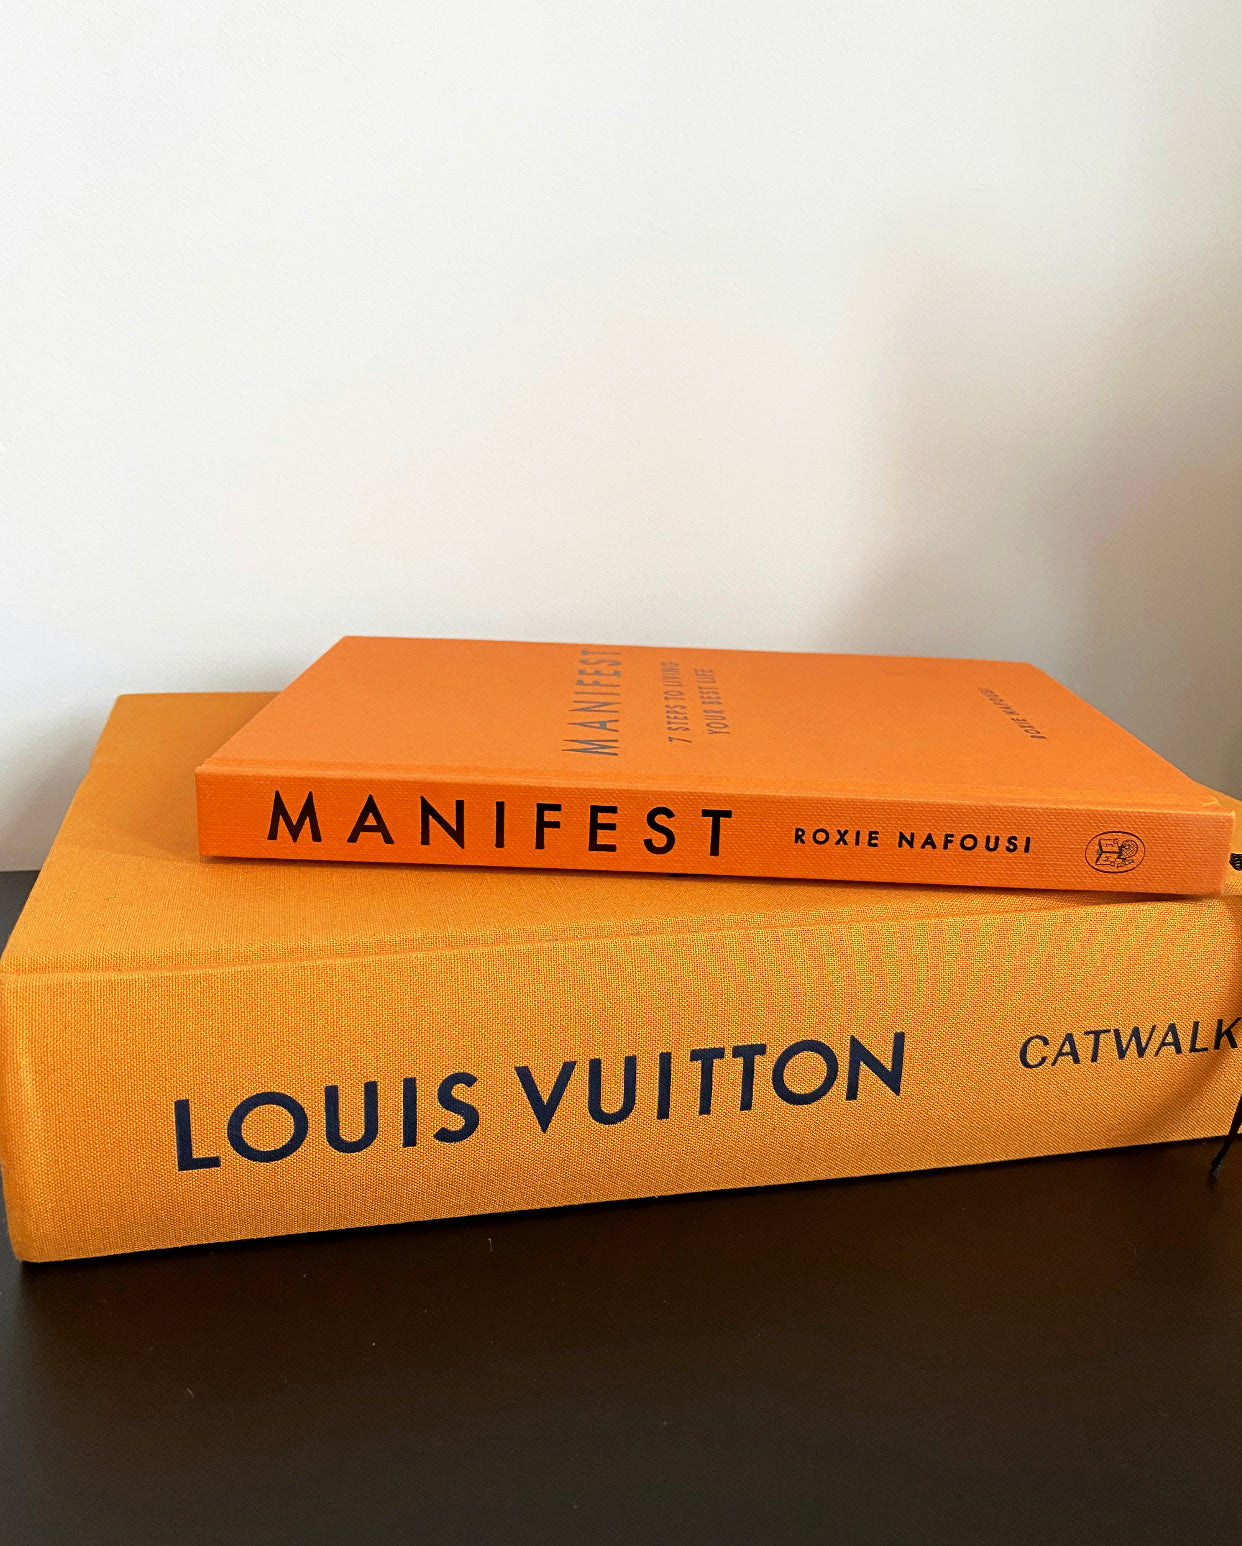 louis vuitton coffee table books hardcover